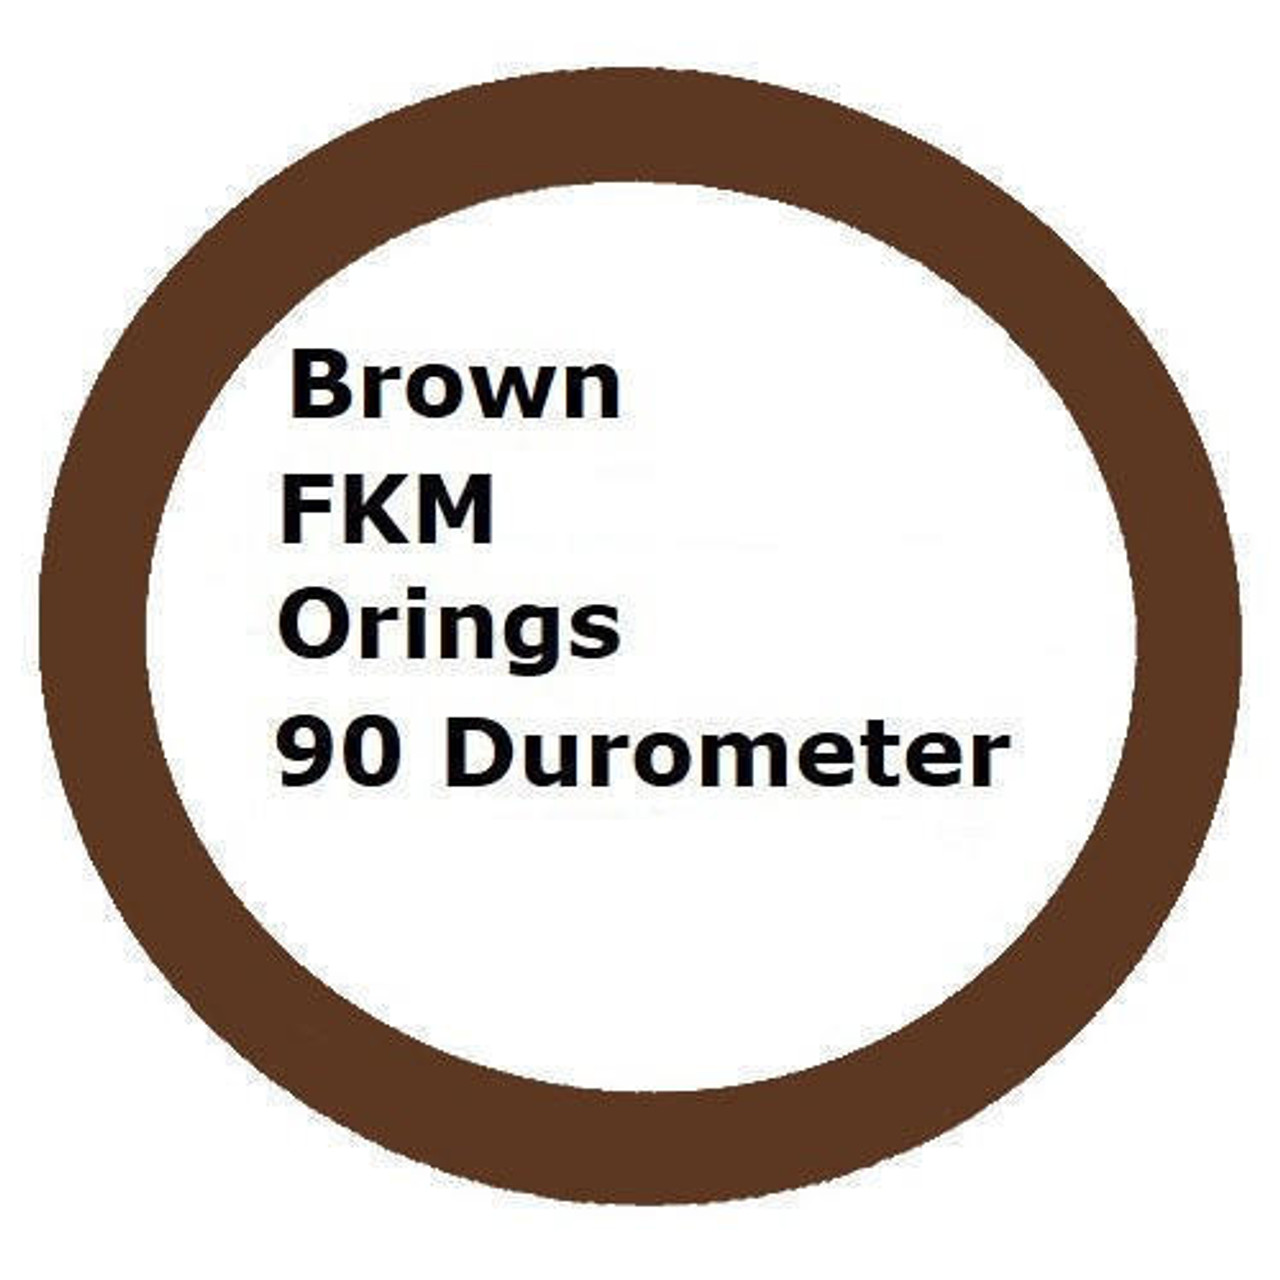 FKM 90 Brown Orings Size 280 Price for 1 pc